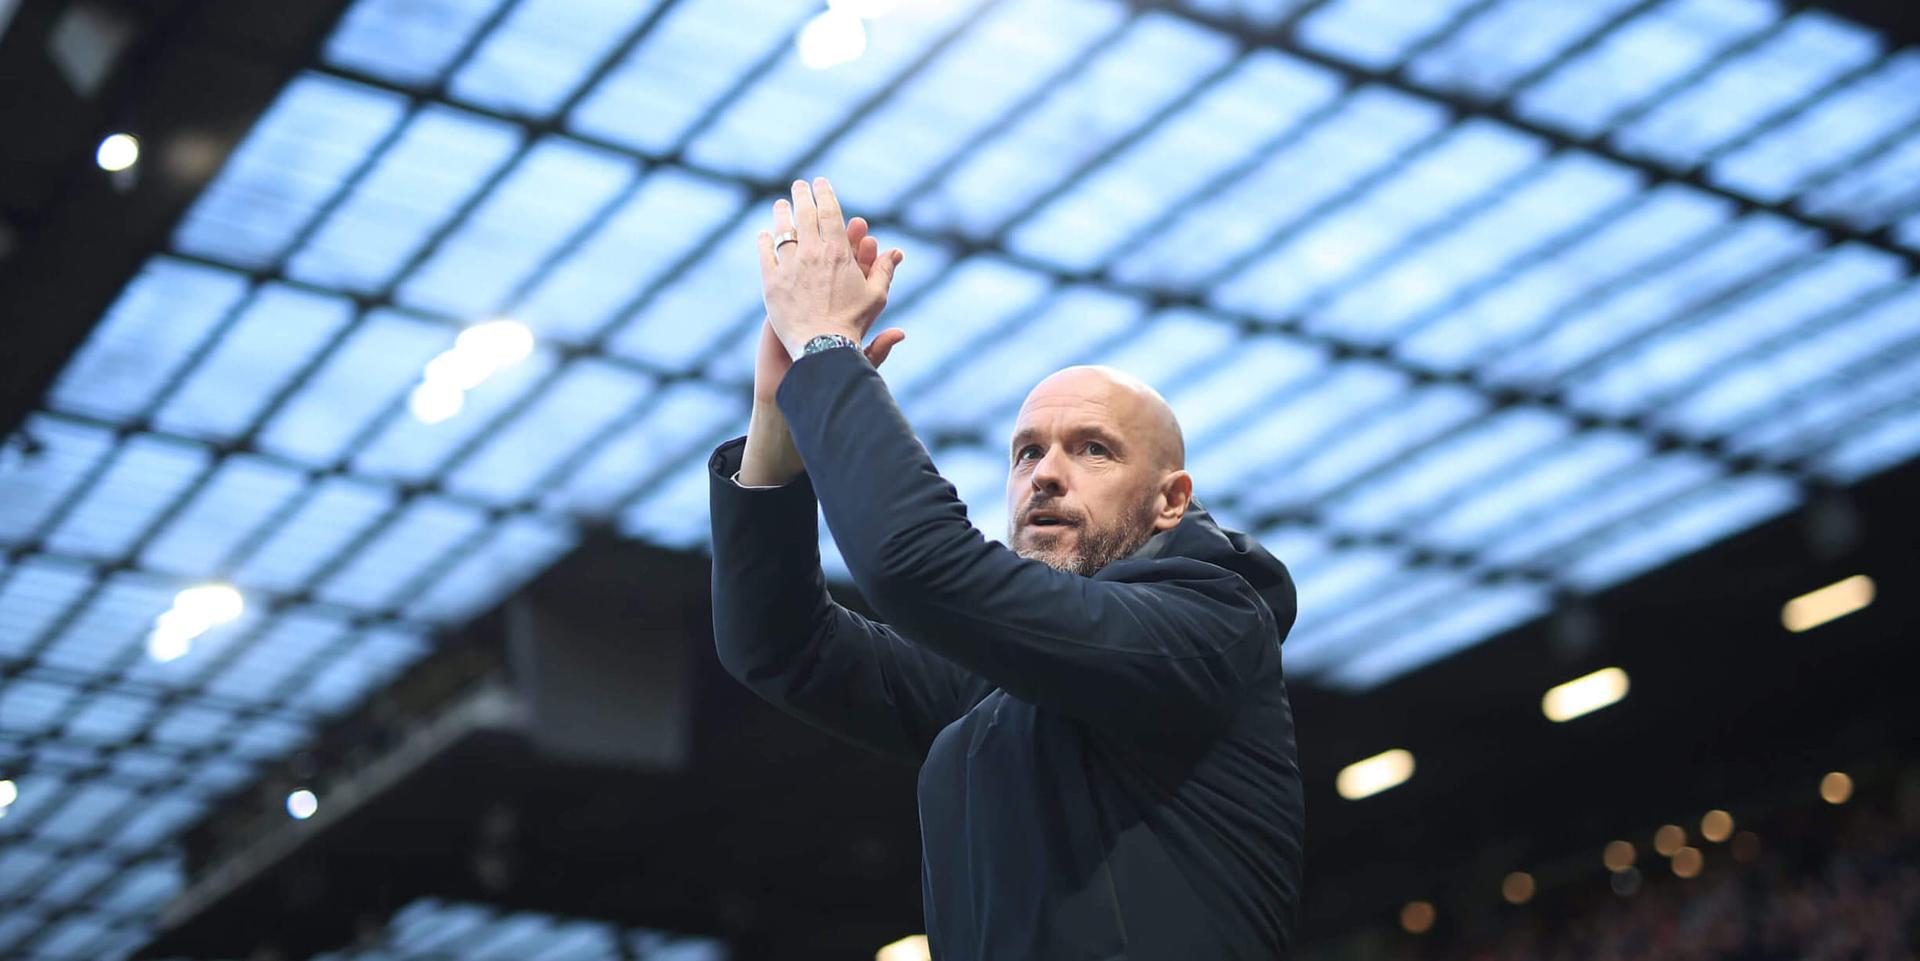 Has Ten Hag become part of the problem at Manchester United?